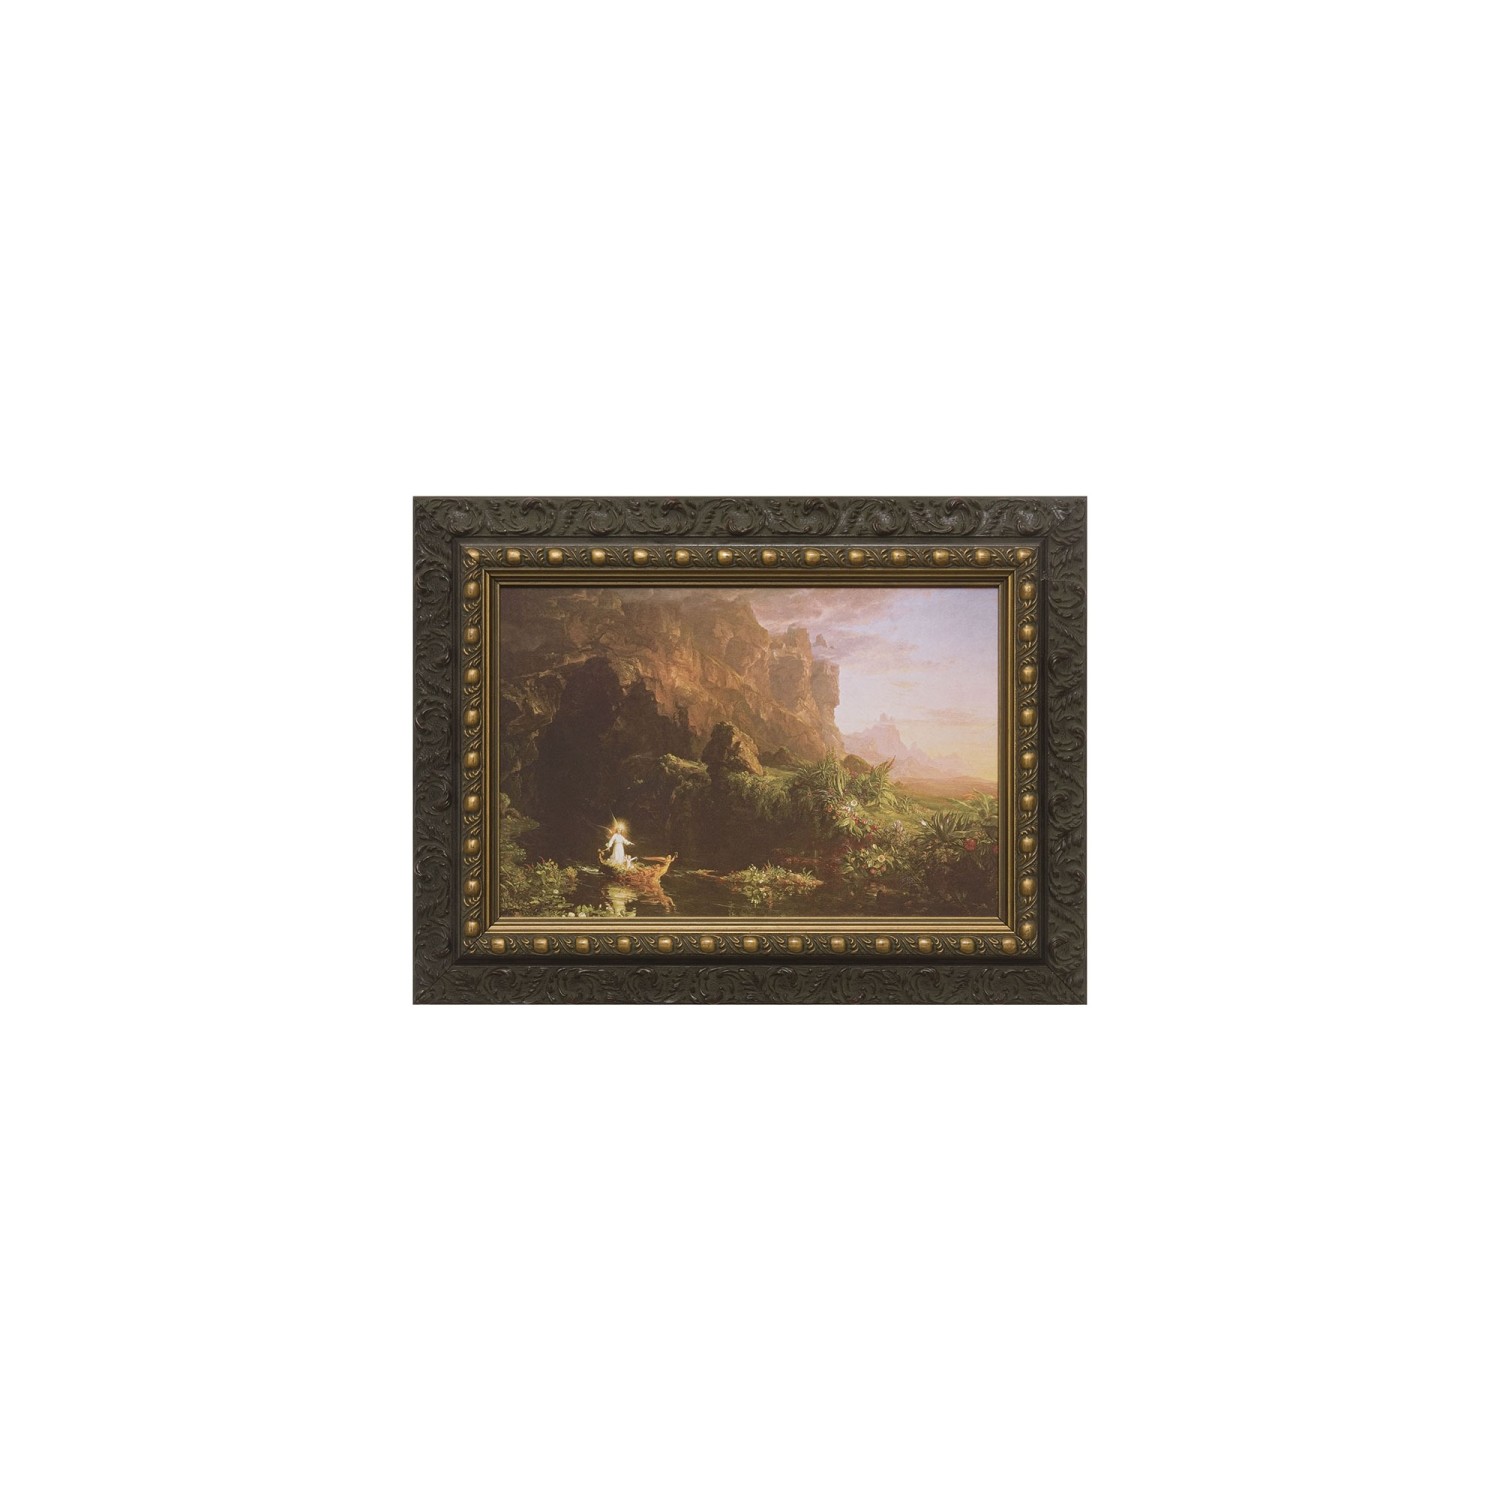 Image of Voyage of Life (Set Four) with Dark Ornate Frame